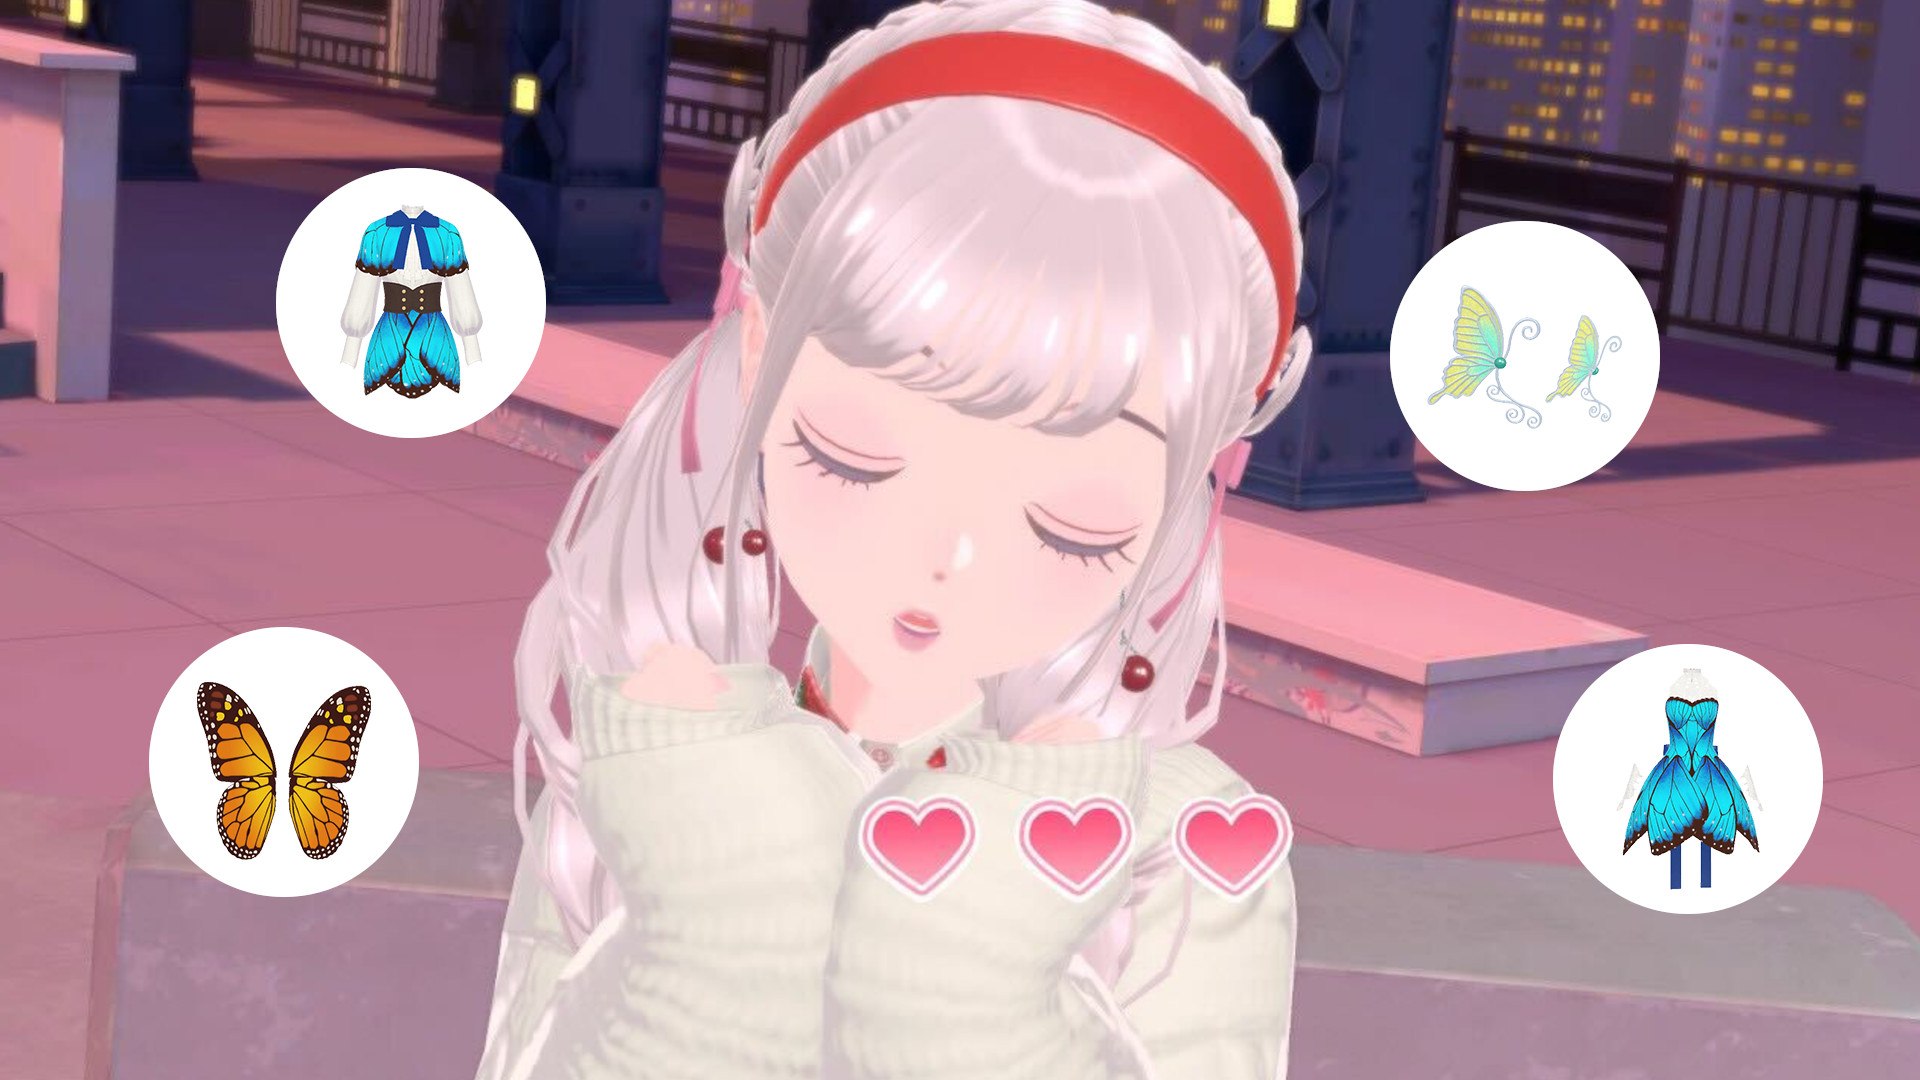 Get cozy in couture with the Fashion Dreamer winter update